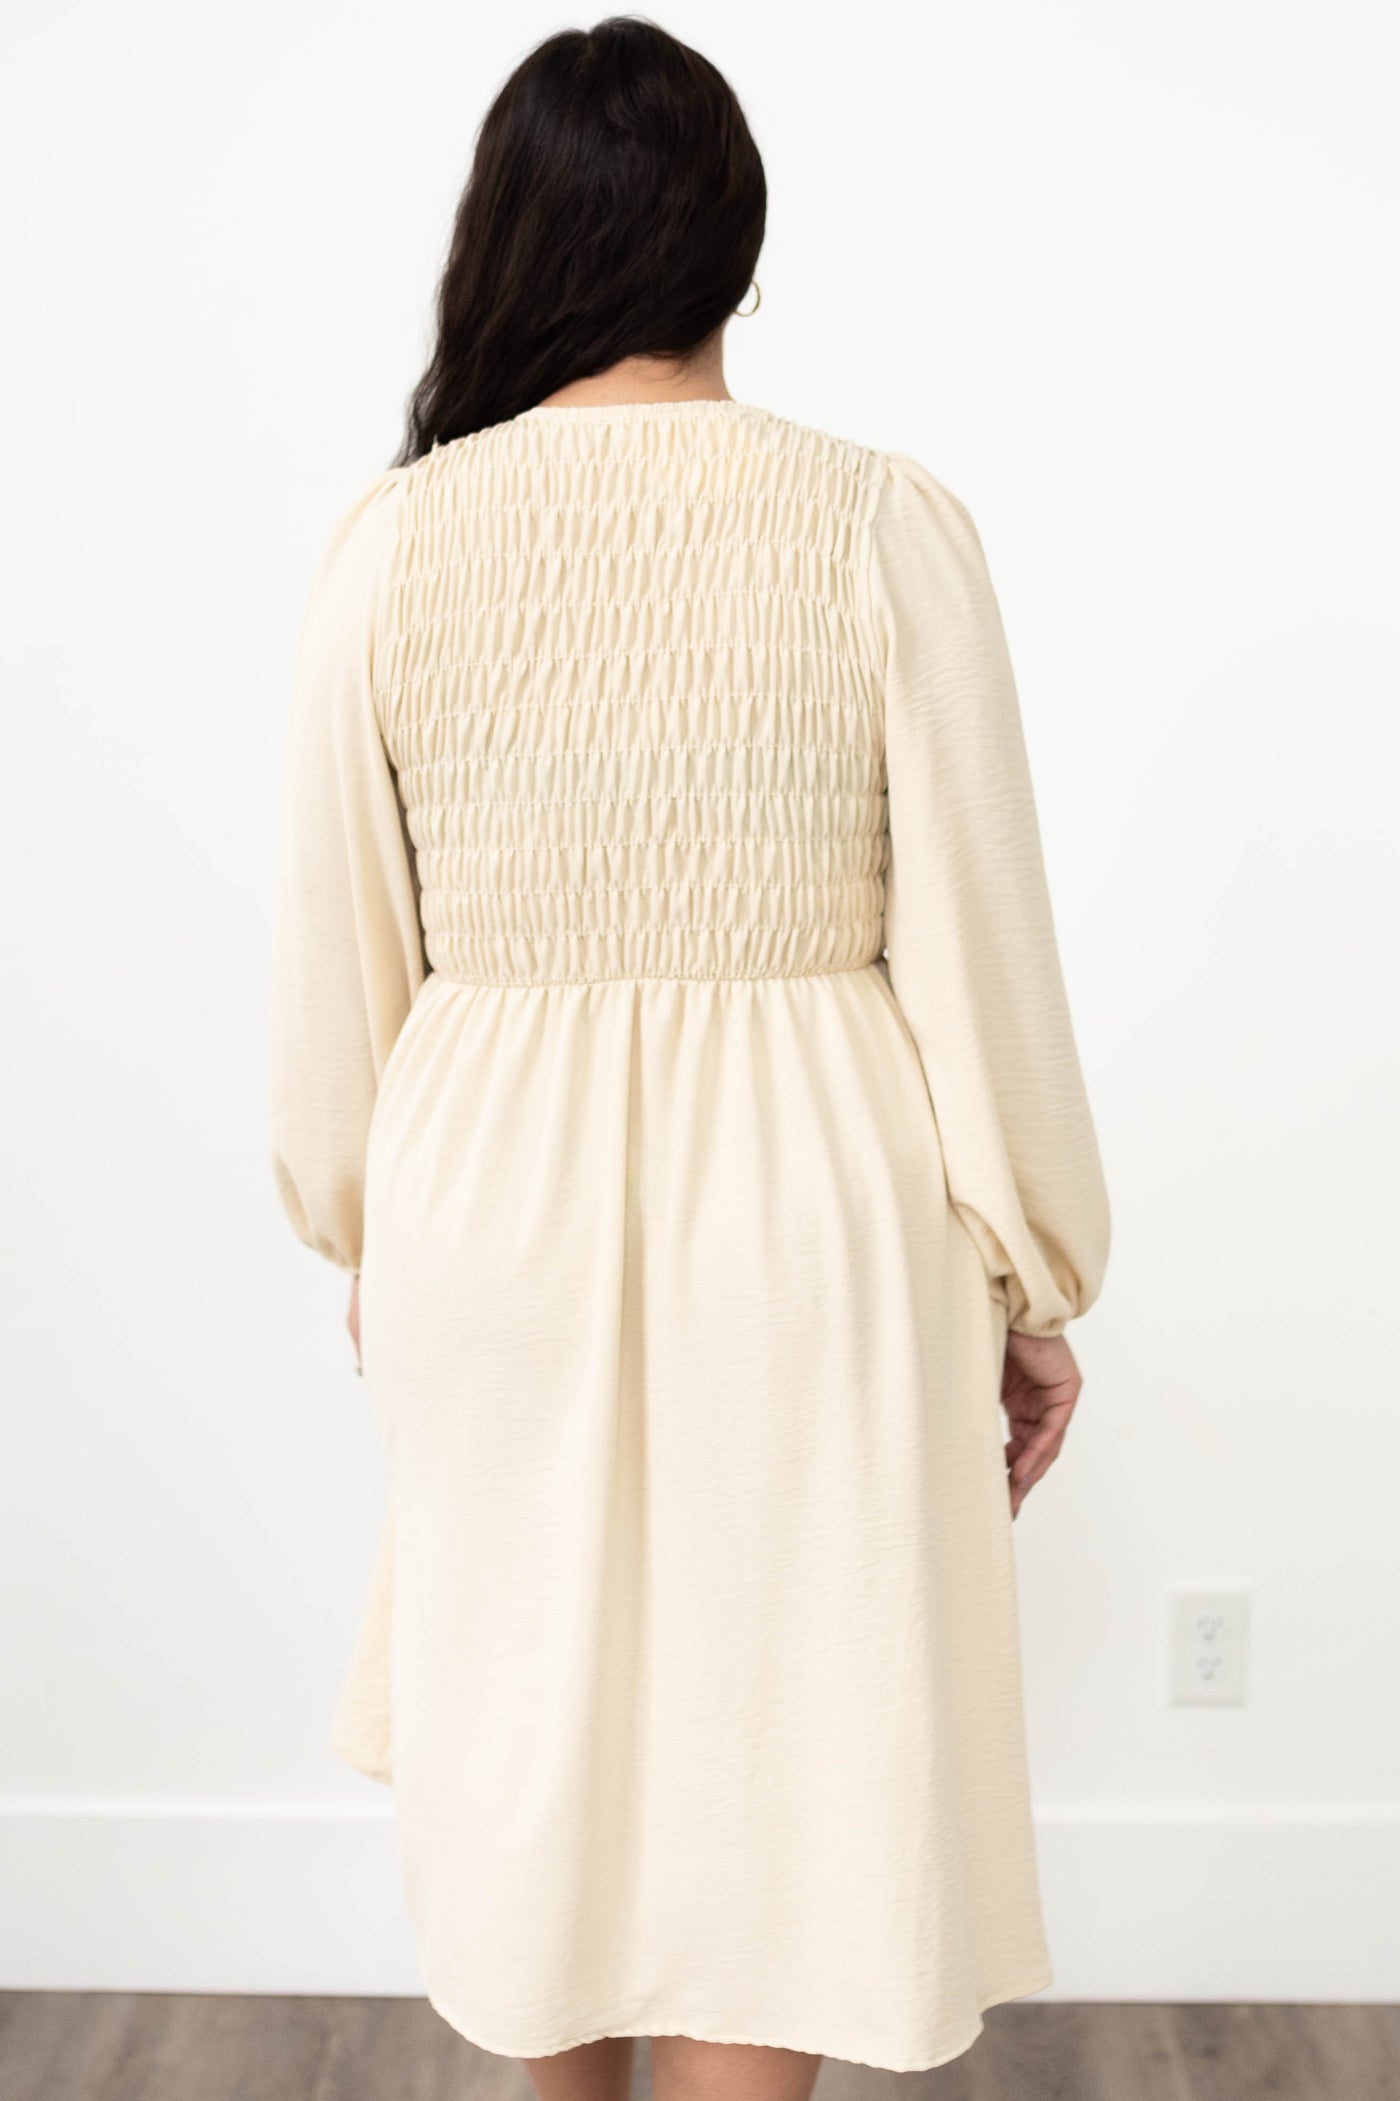 Back view of a cream lace dress